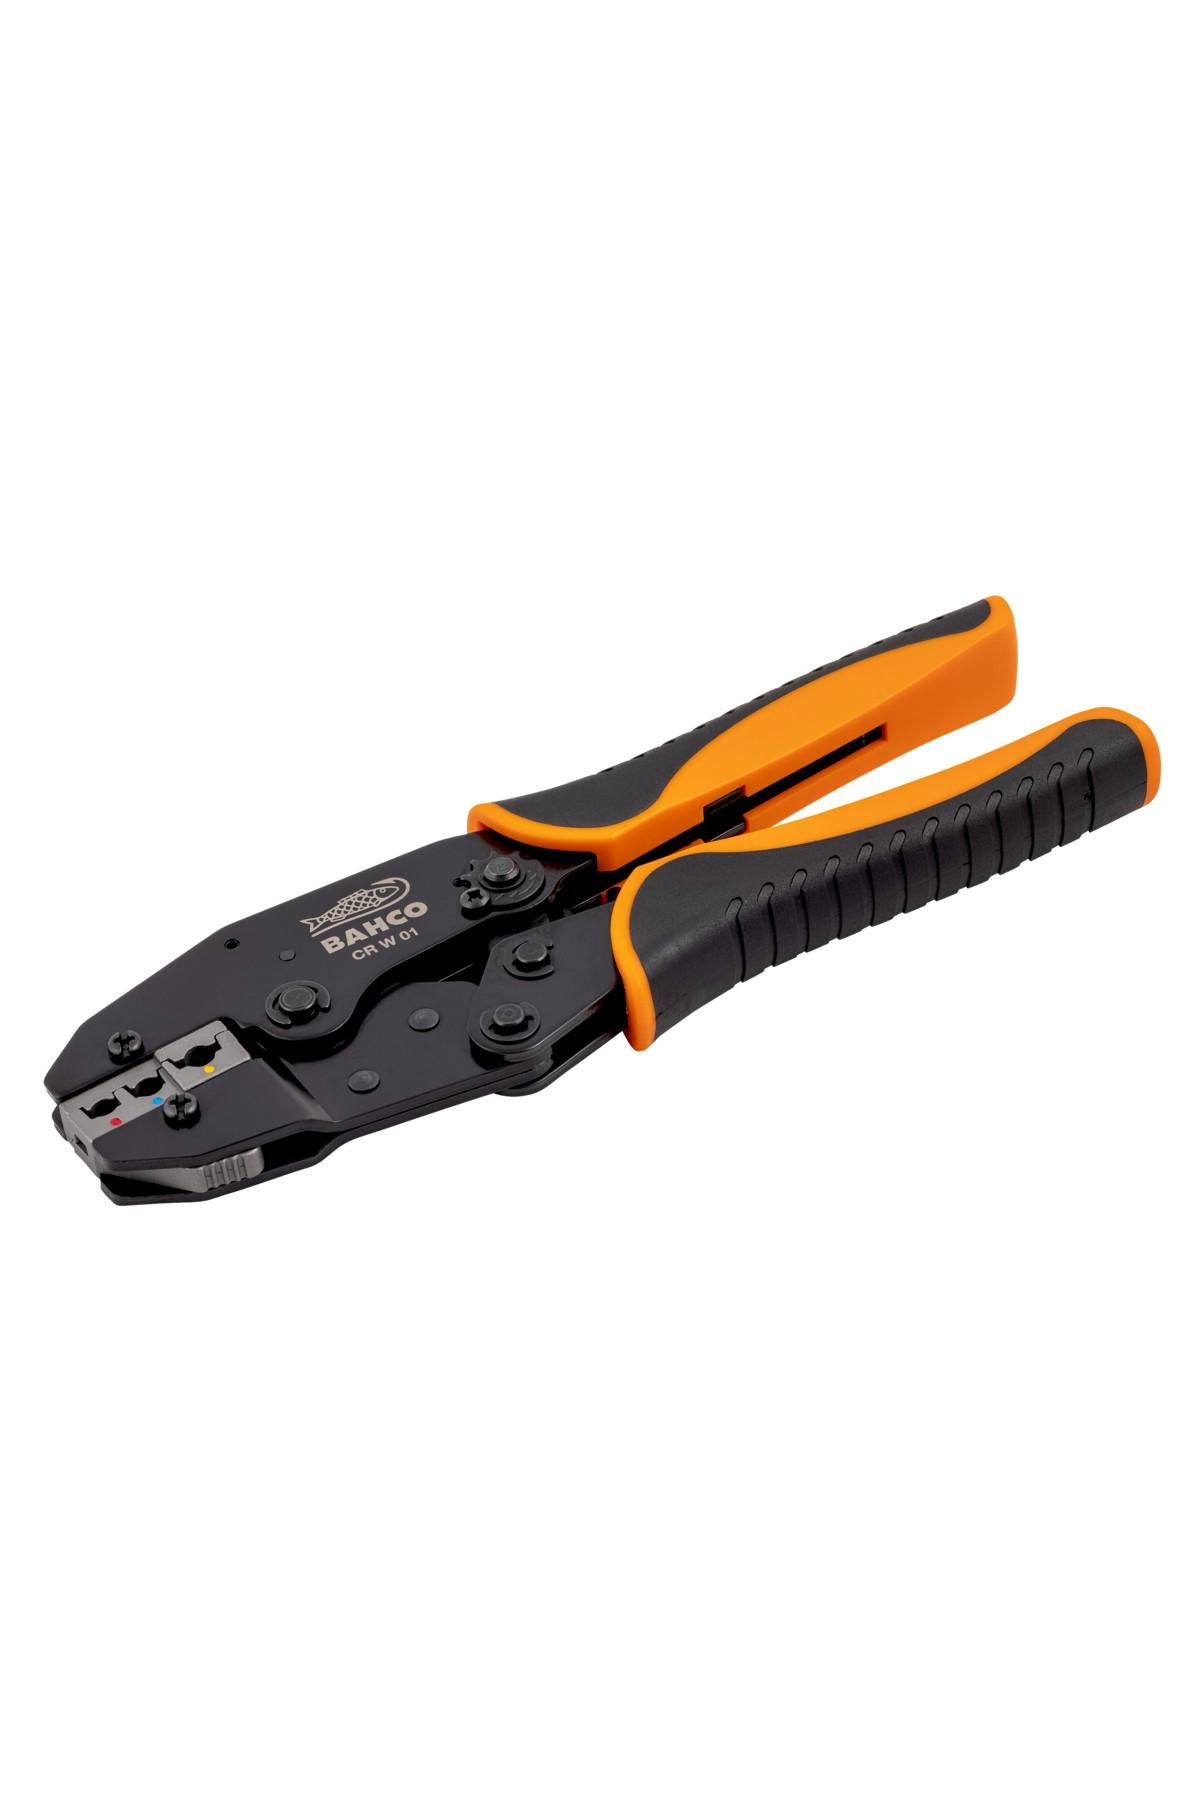 Crimping pliers with ratchet function for insulated connectors 0.5-6.0 mm